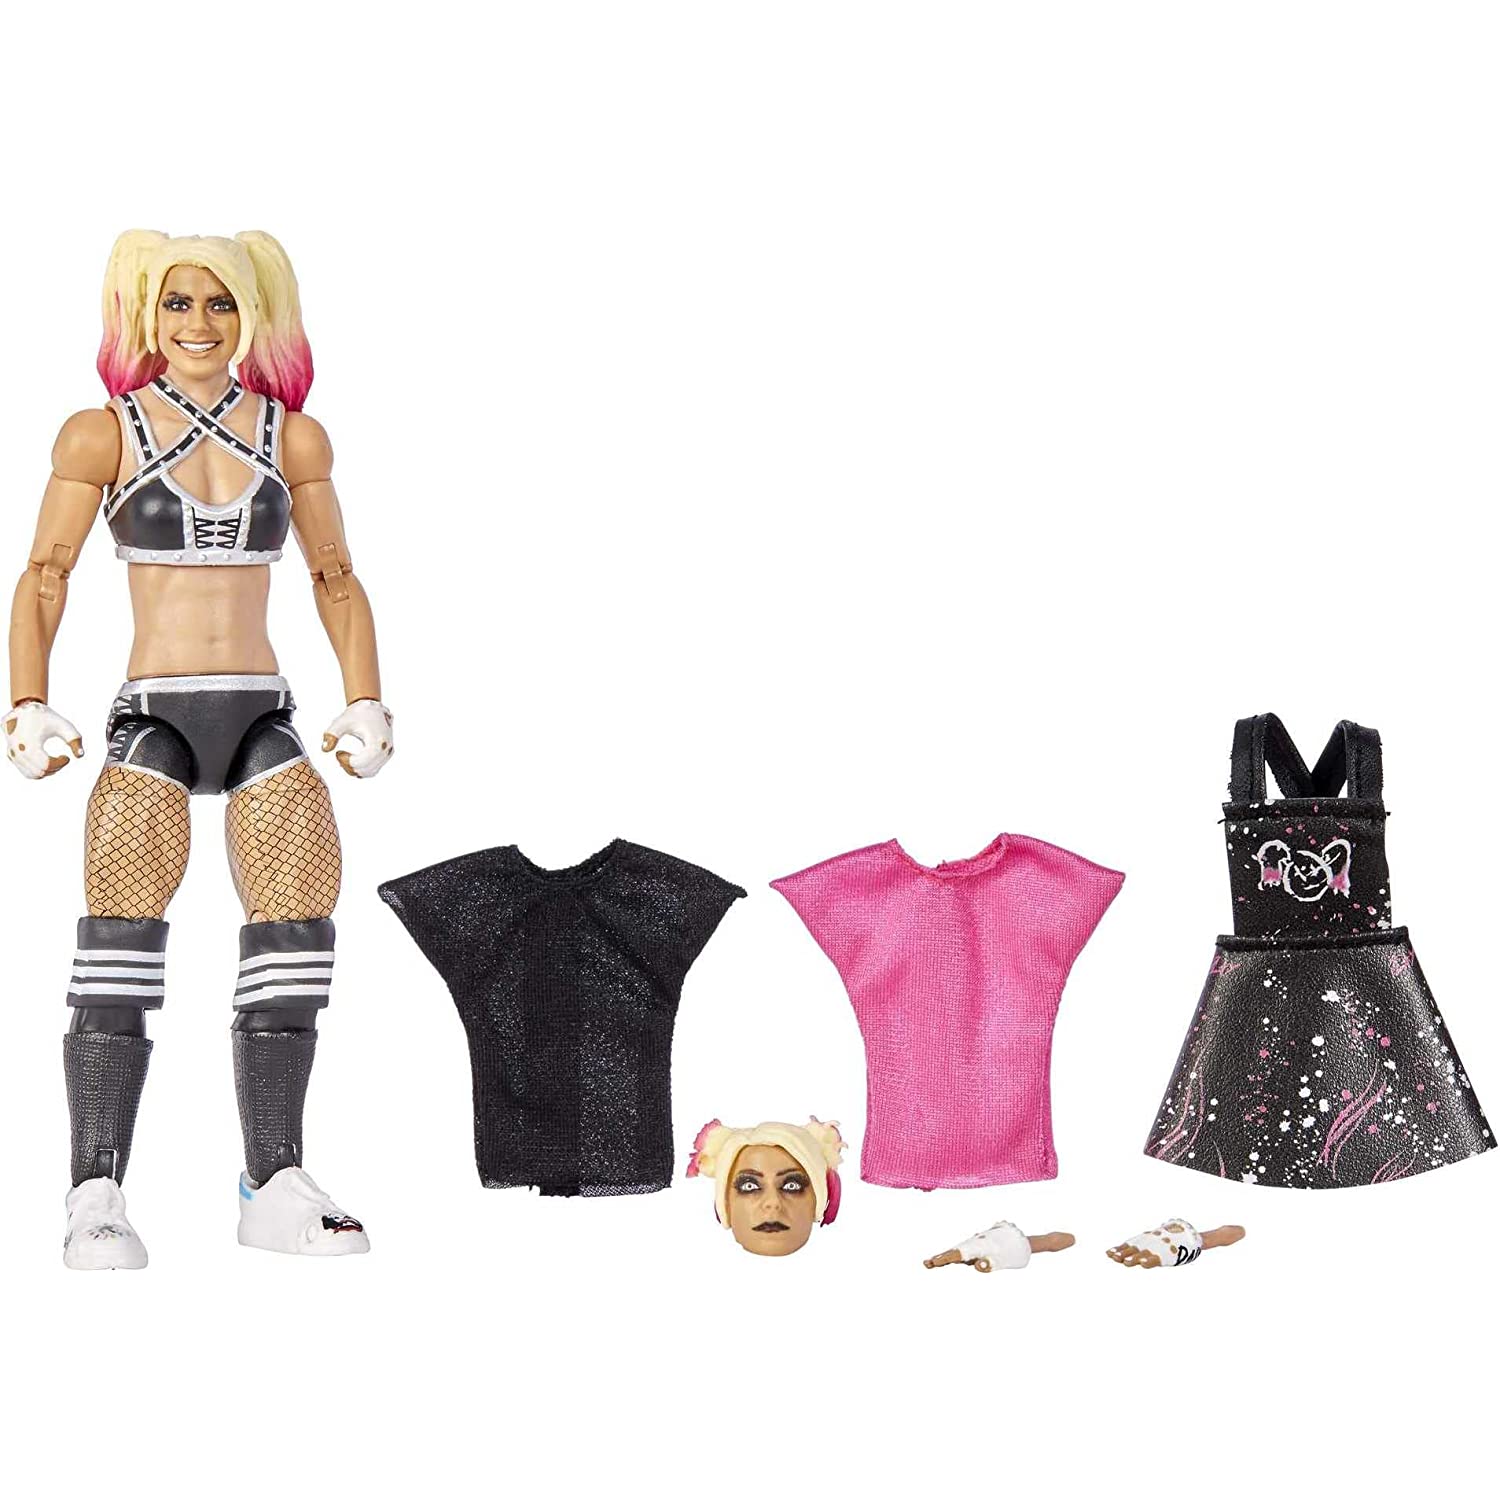 WWE Ultimate Edition Action Figure & Accessories Sets, 6-inch Collectible  Superstars with 30 Articulation Points 